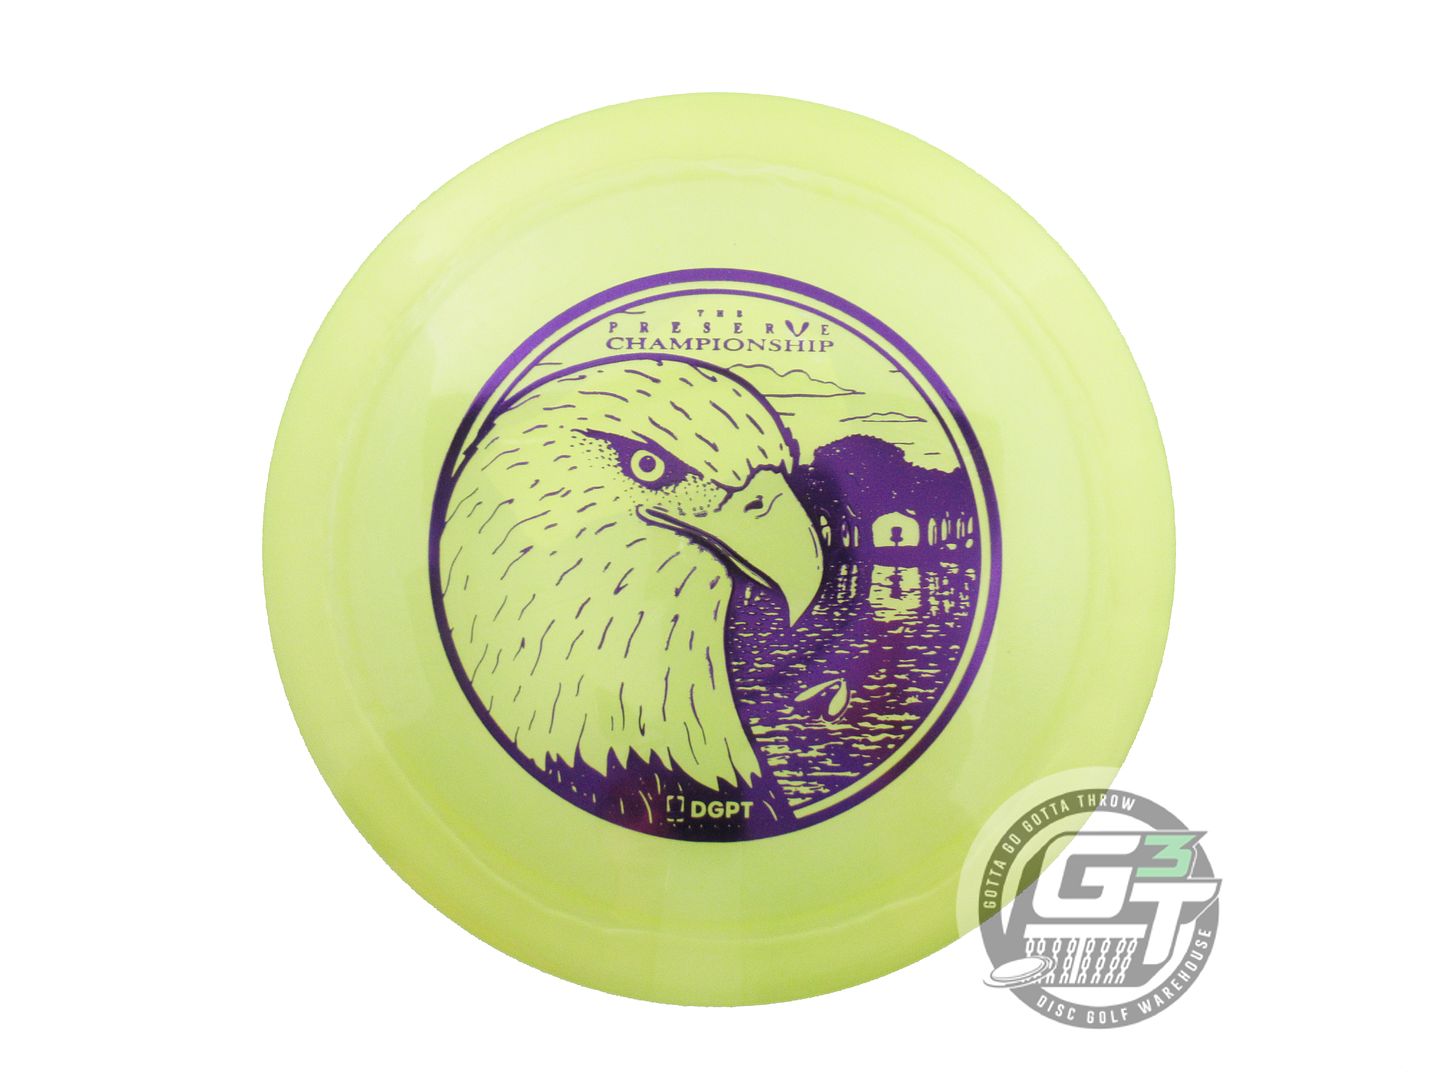 Prodigy LImited Edition Minnesota Preserve Championship Eagle Stamp 500 Series X5 Distance Driver Golf Disc (Individually Listed)